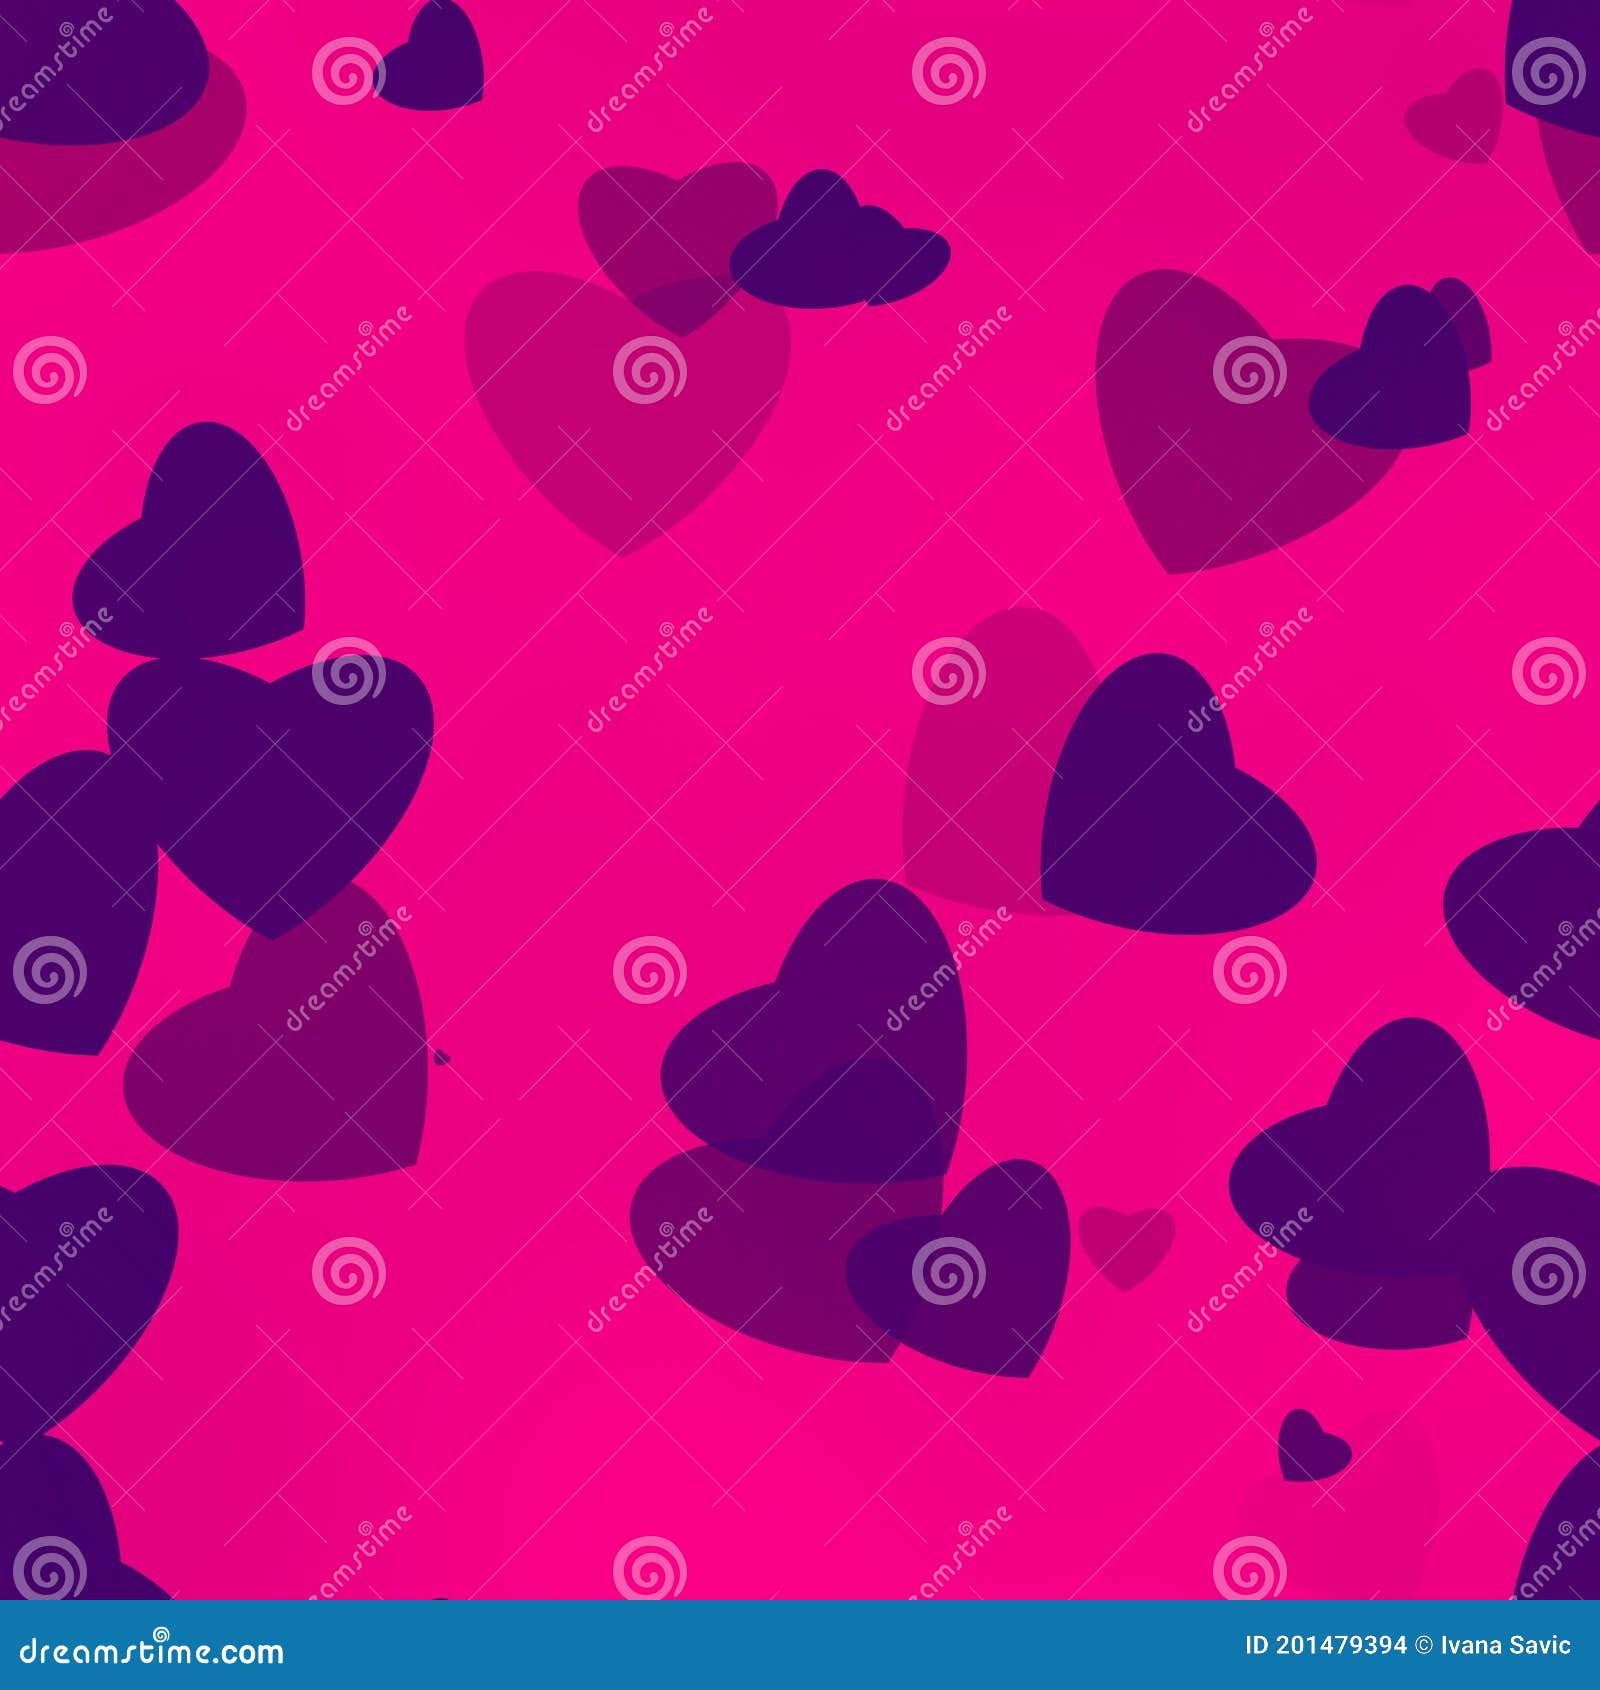 Abstract Purple Hearts on Bright Pink Background Stock Illustration ...